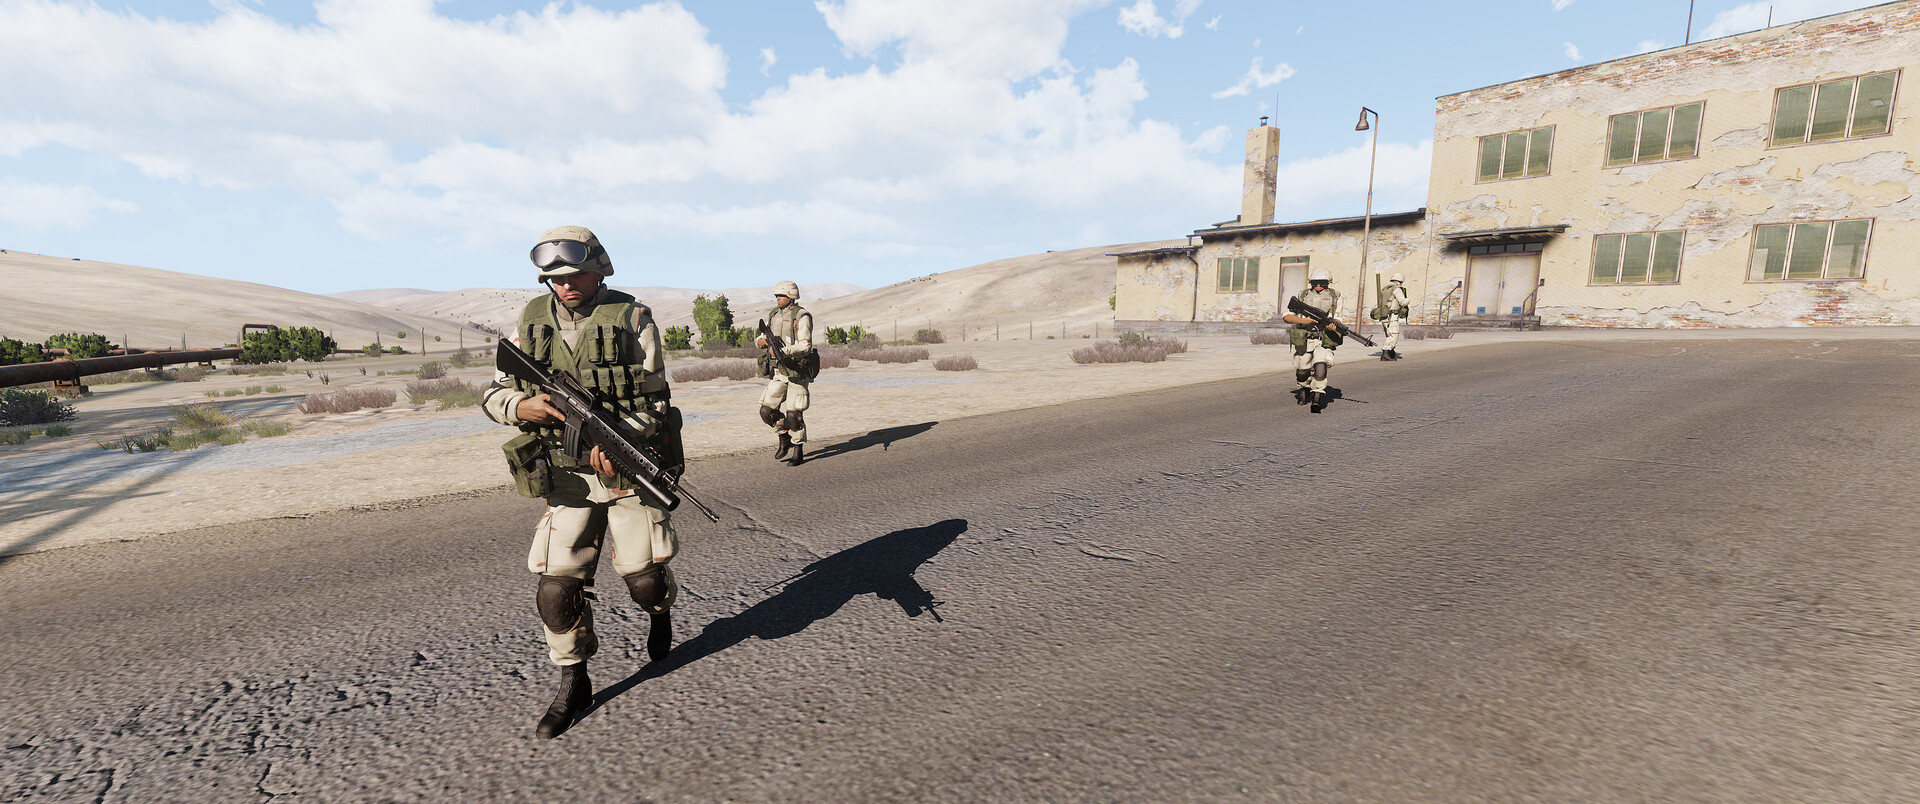 ArtStation - Clothes mod for the game Arma 3 winter camouflage.